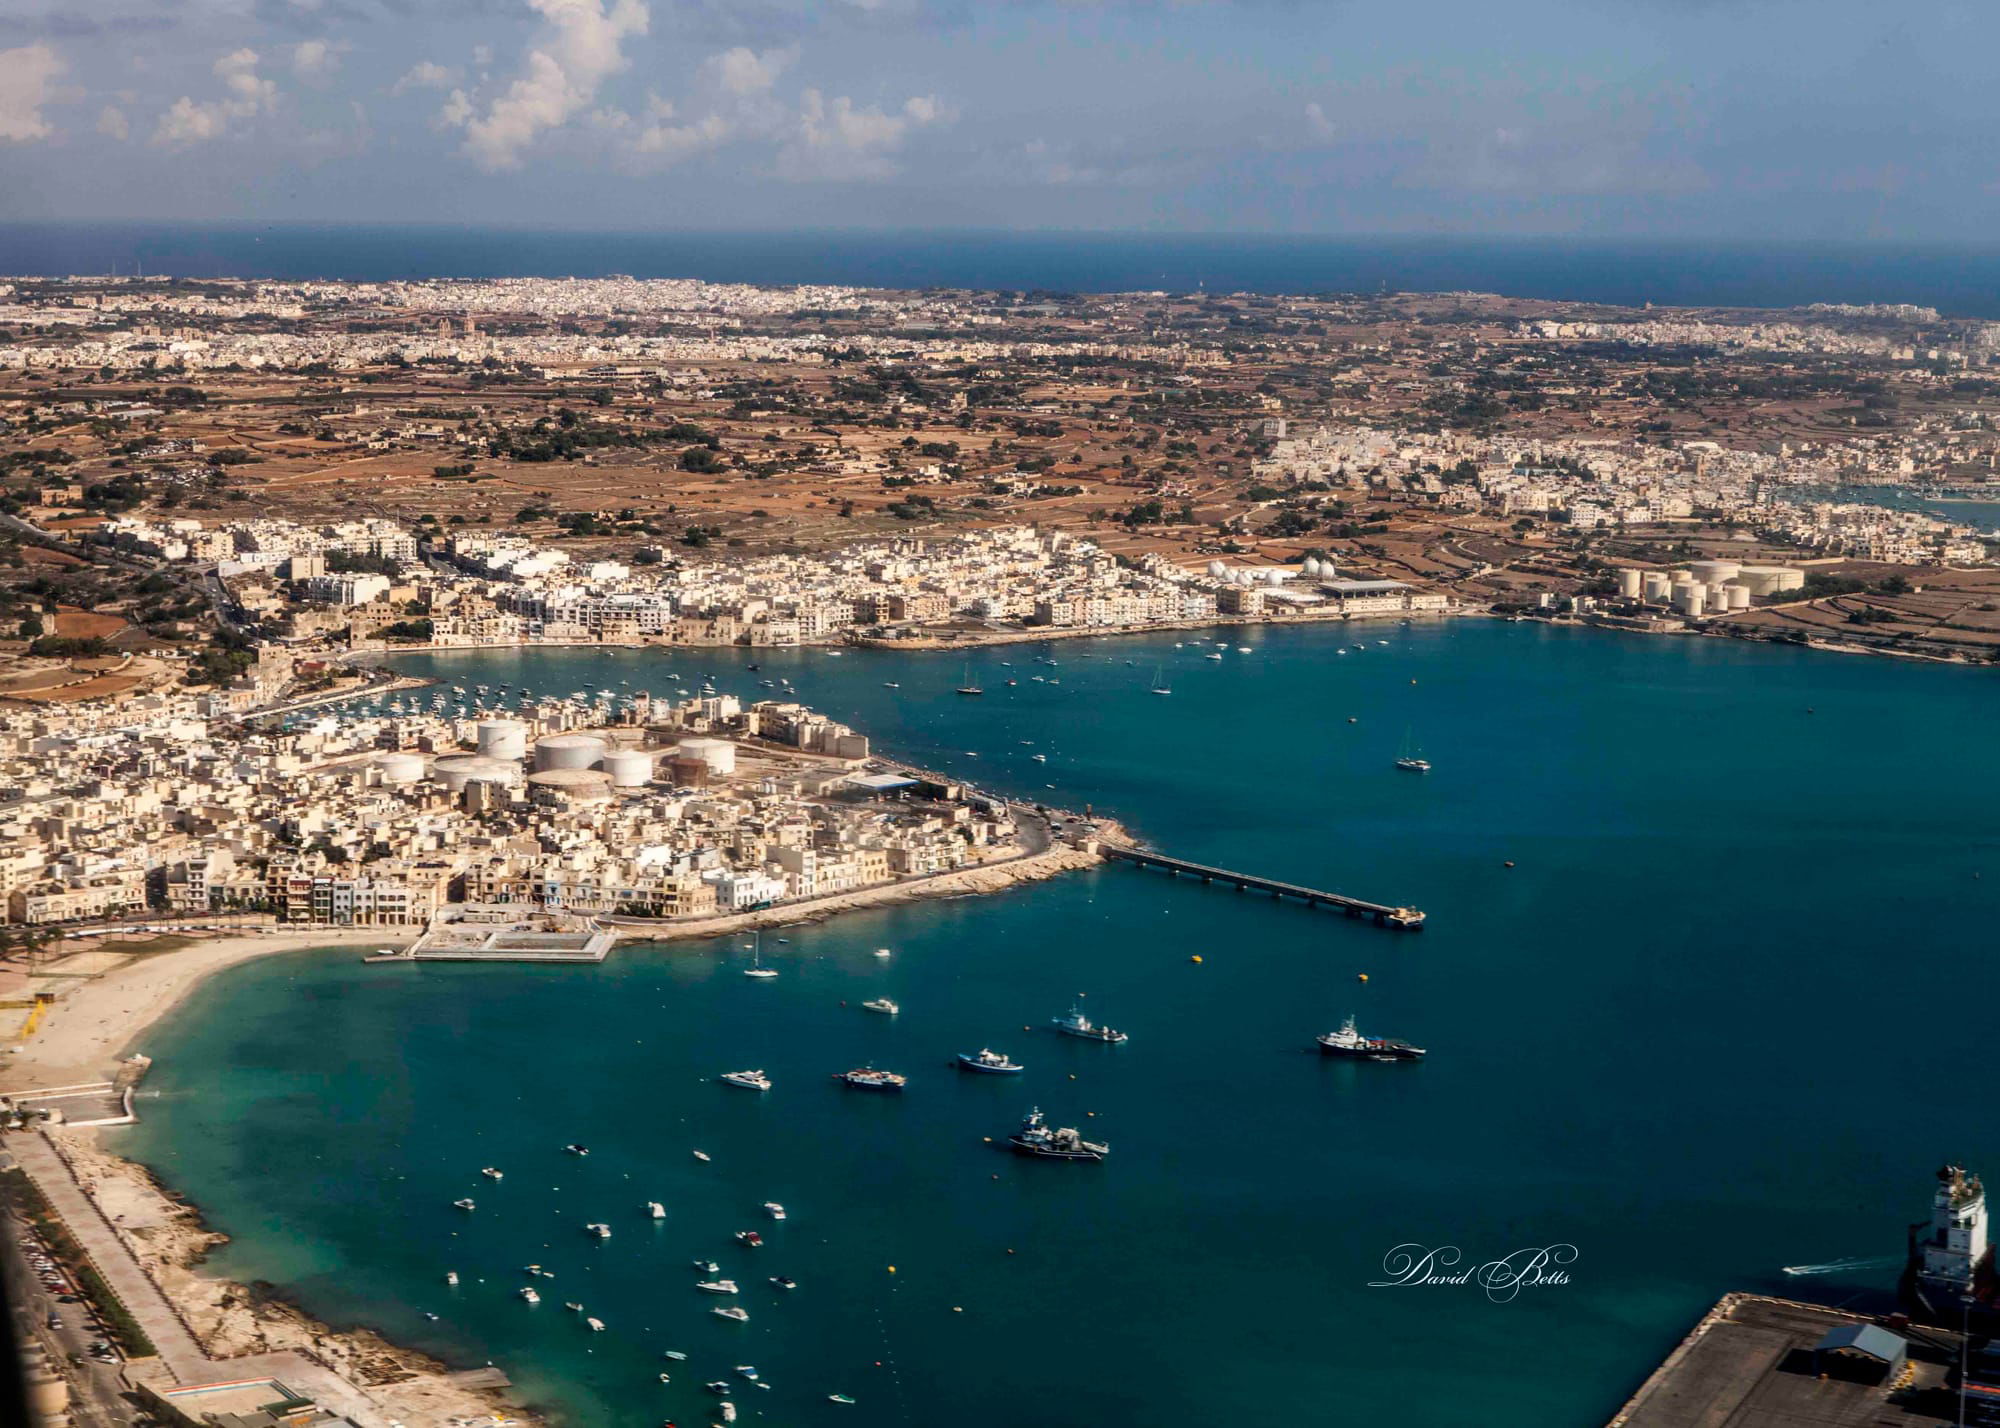 Malta from the Air